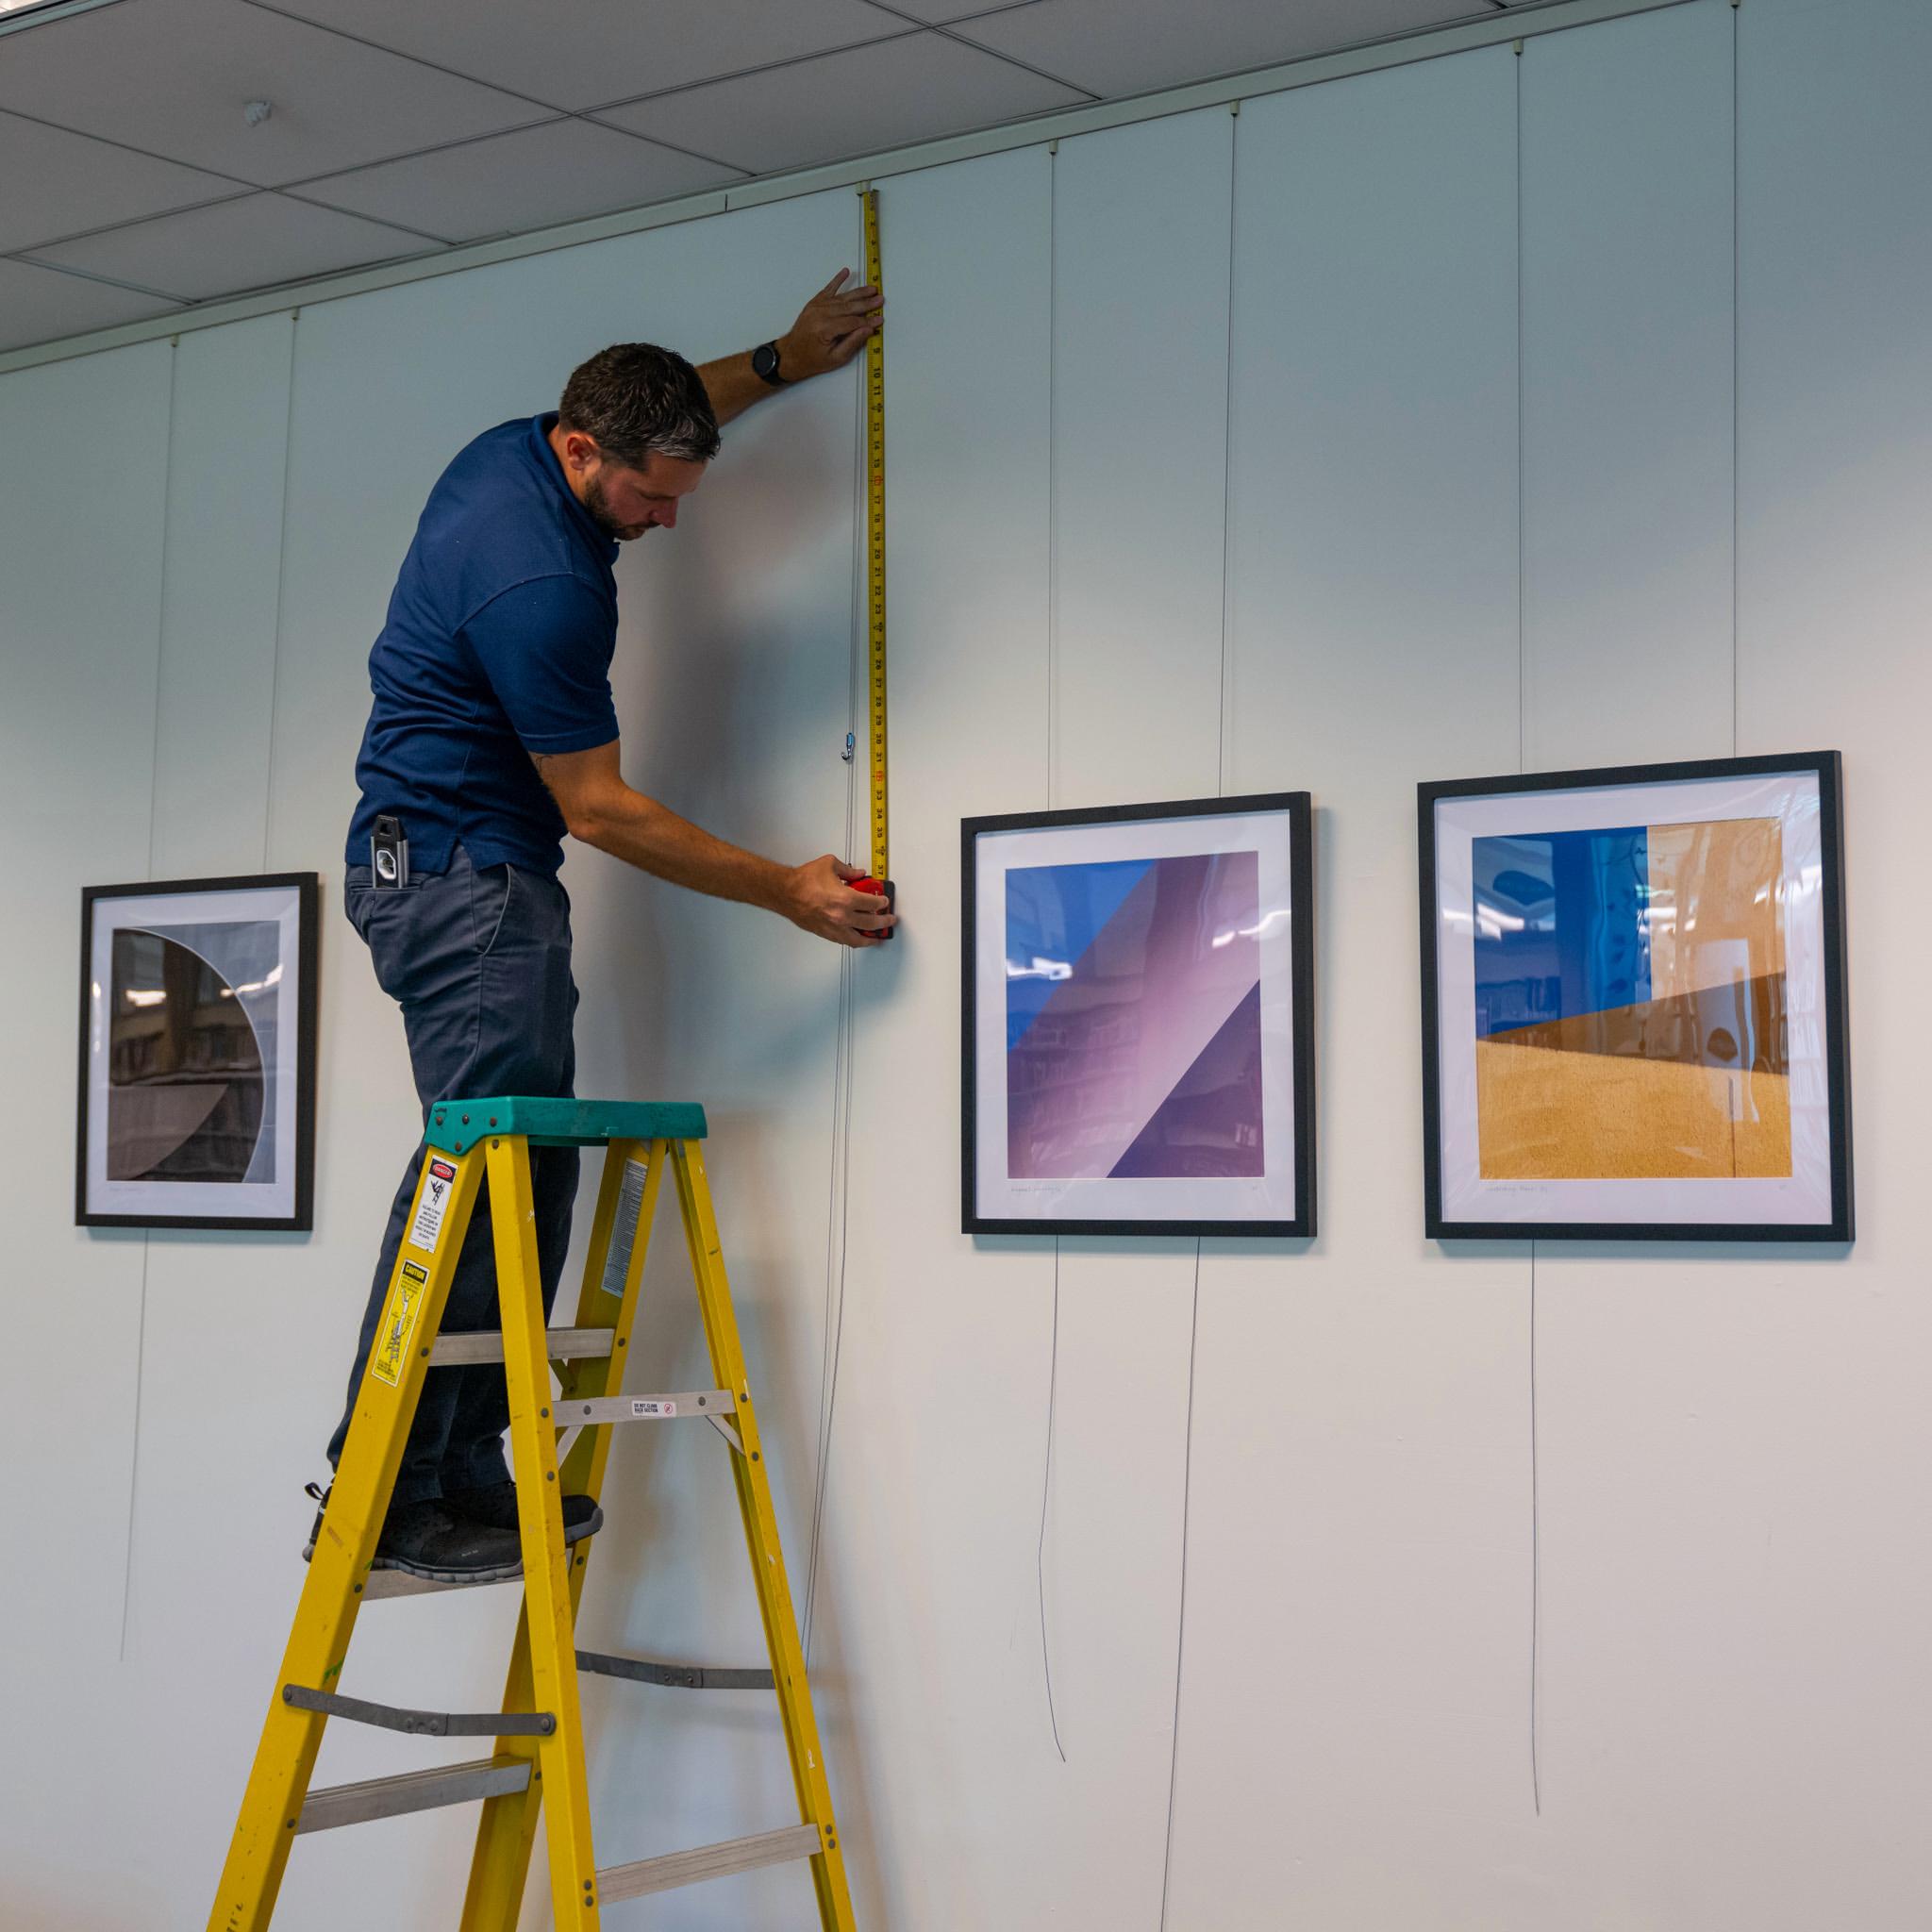 Hanging the Prints